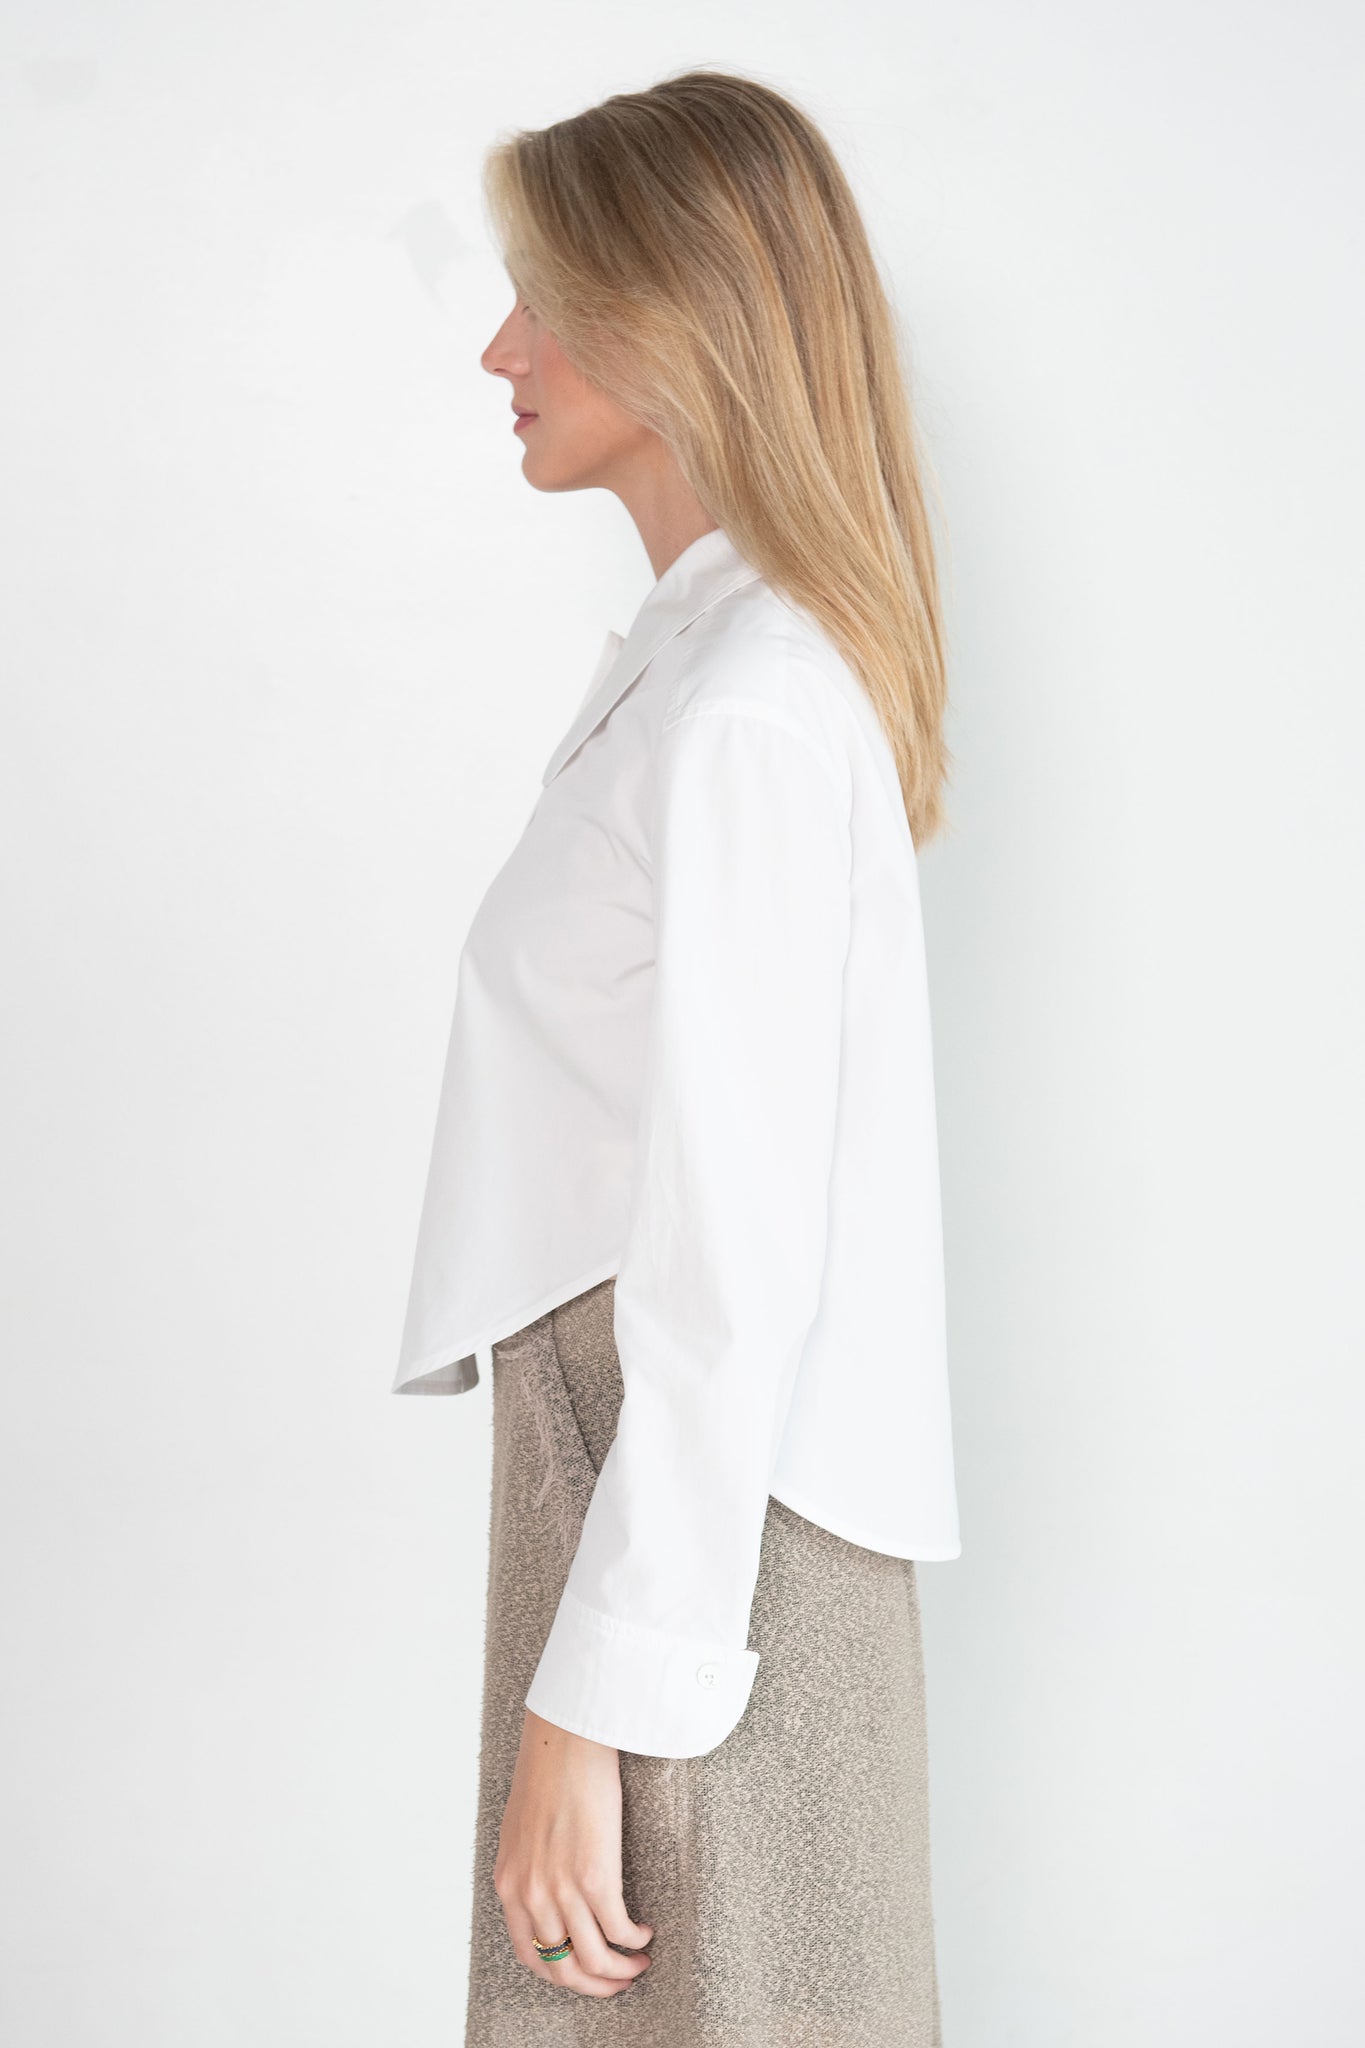 Veronique Leroy - Rounded Collar Shirt, White